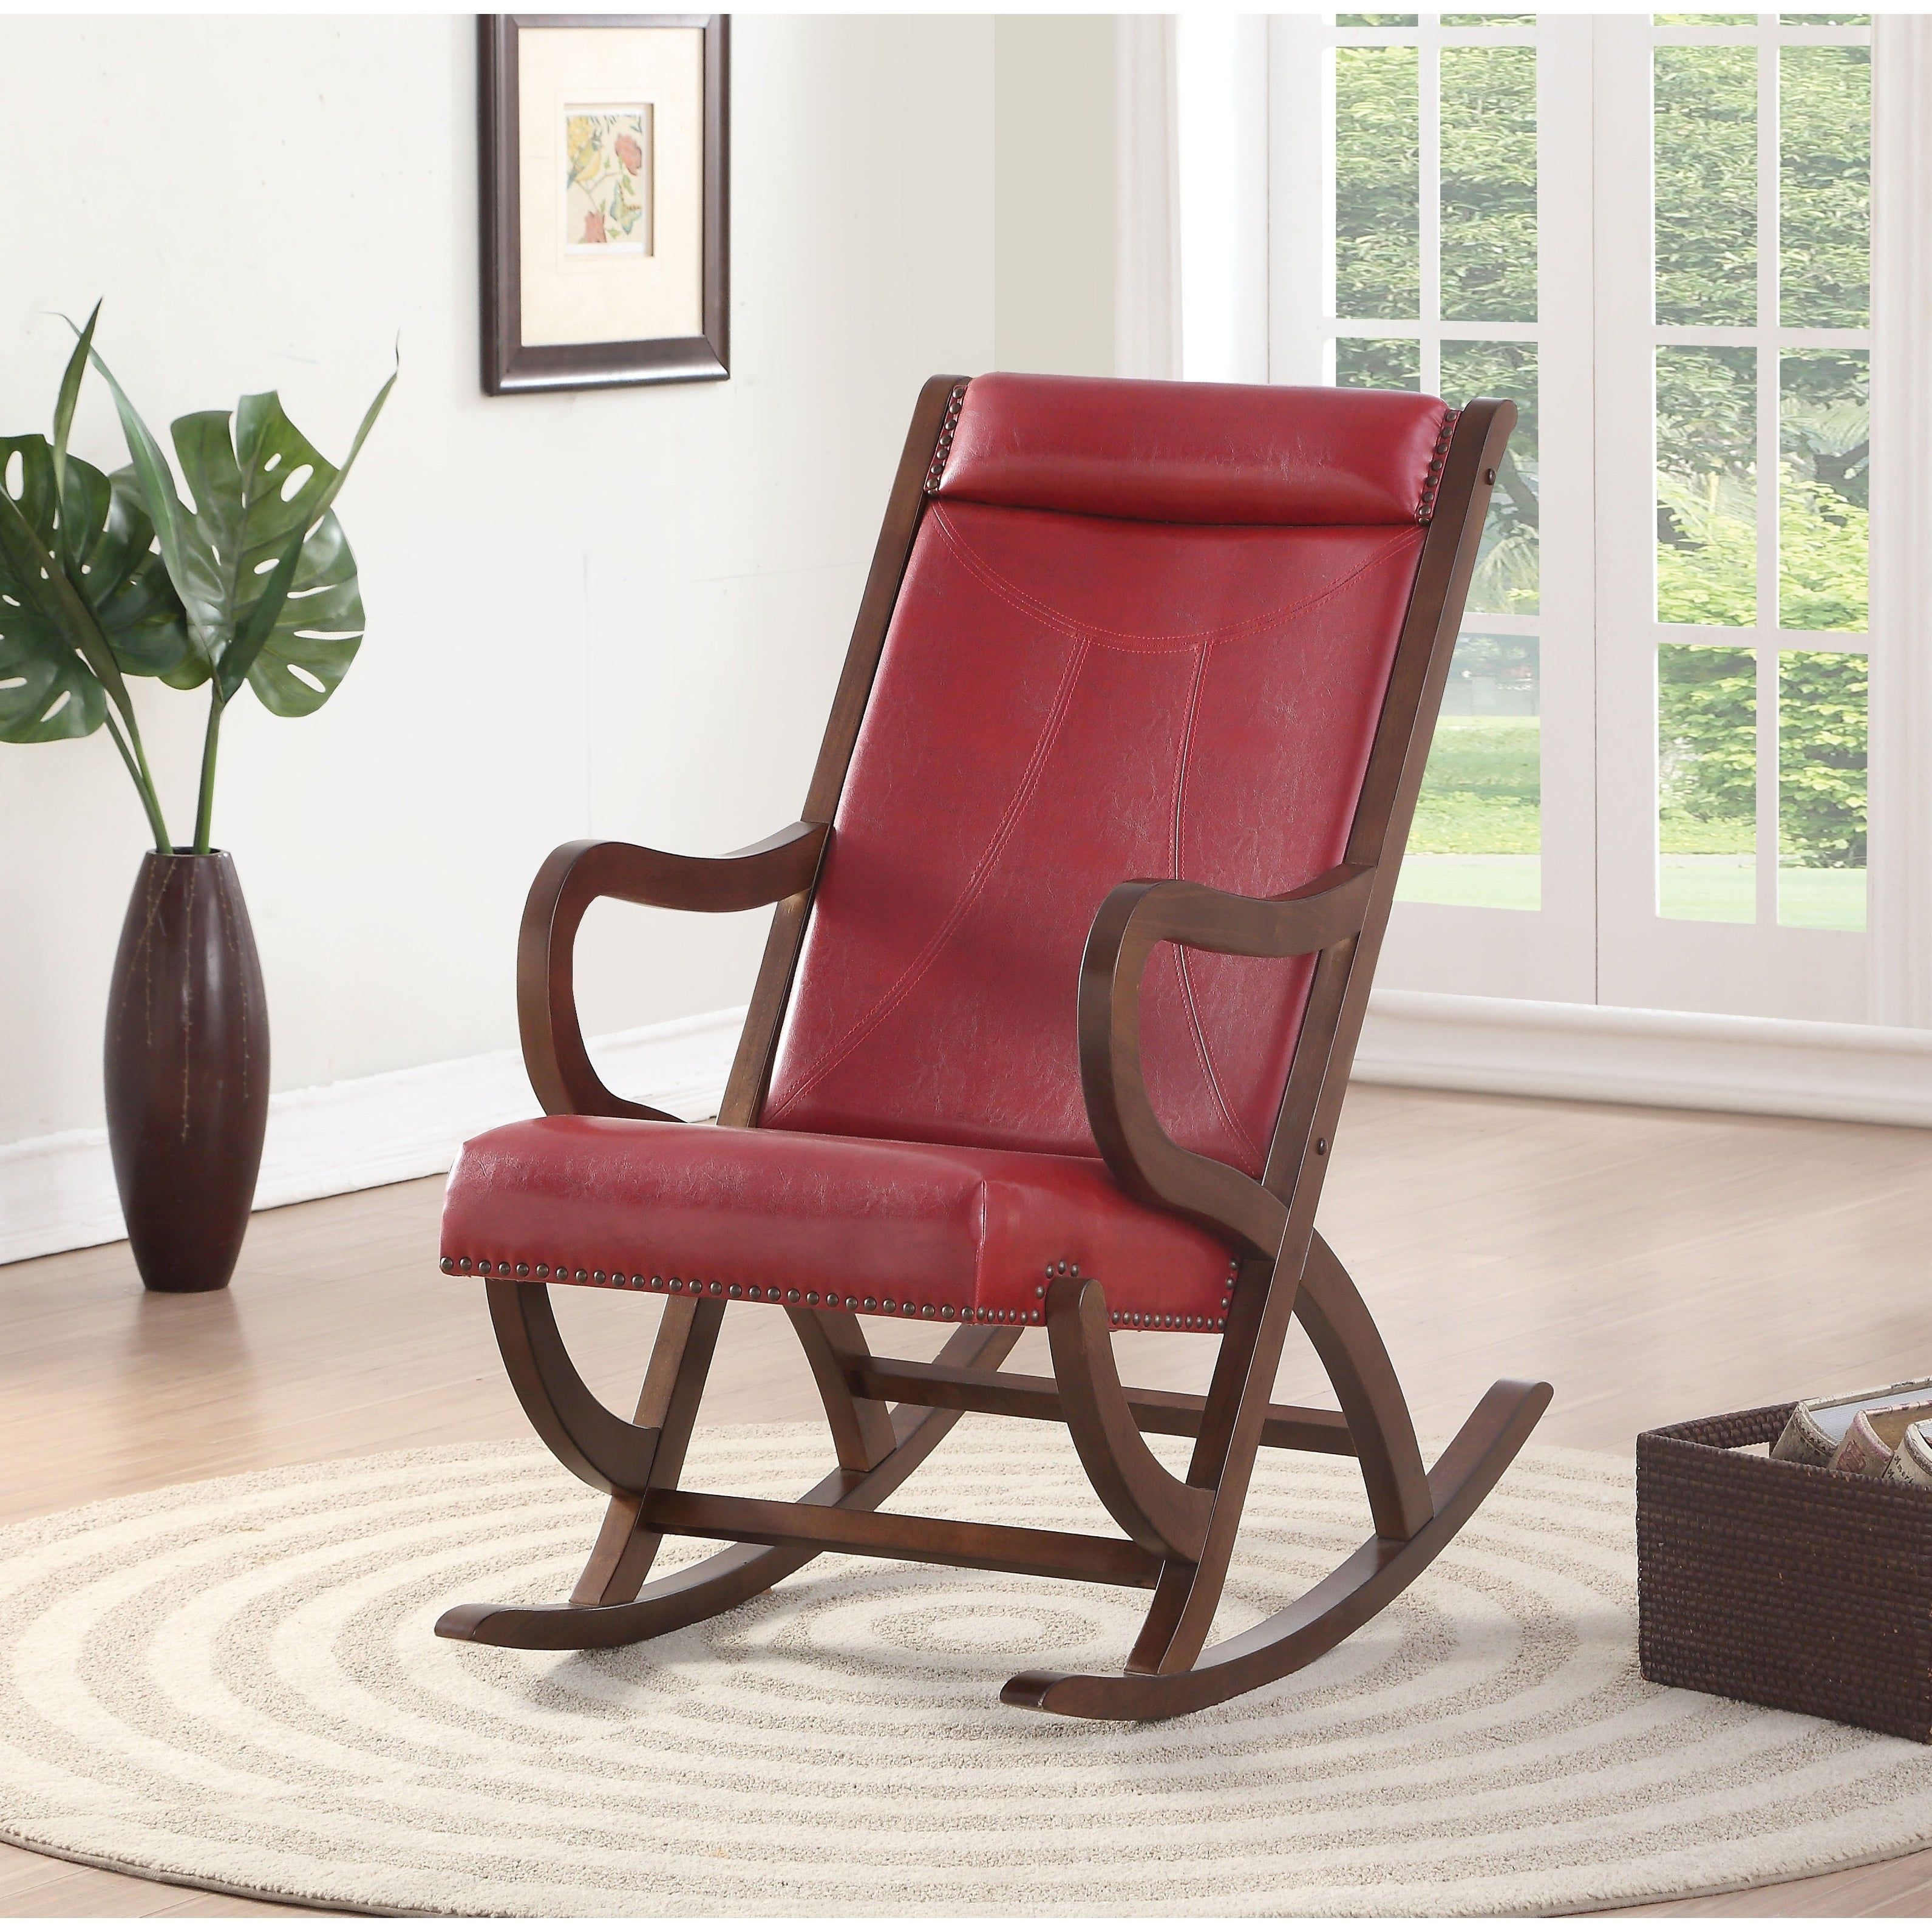 Faux Leather Upholstered Wooden Rocking Chair With Looped Arms, Brown And  Red With Weston Rocking Chairs (View 6 of 20)